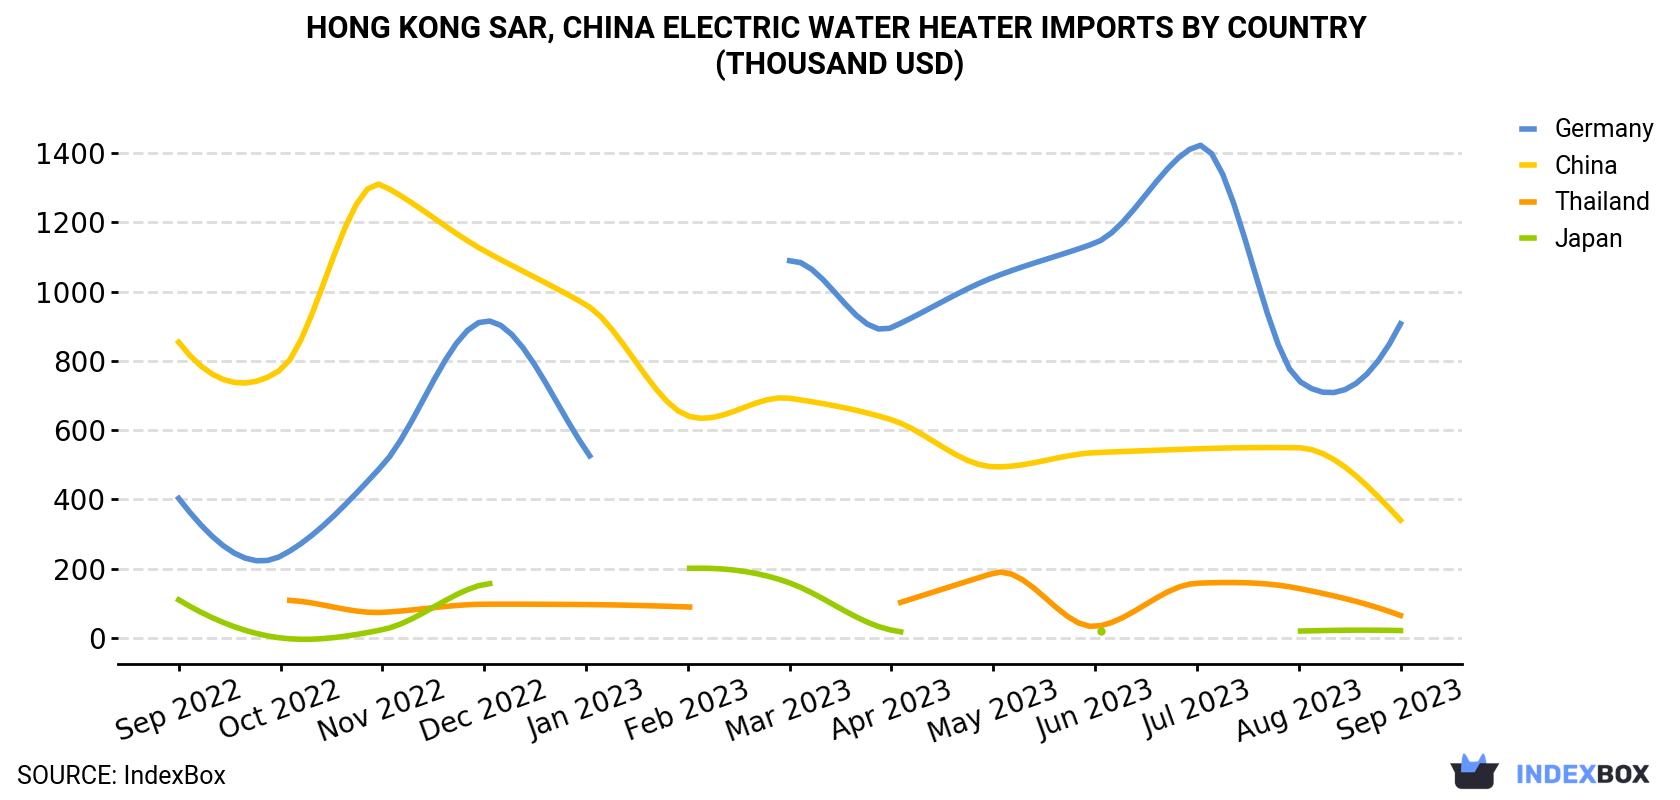 Hong Kong Electric Water Heater Imports By Country (Thousand USD)